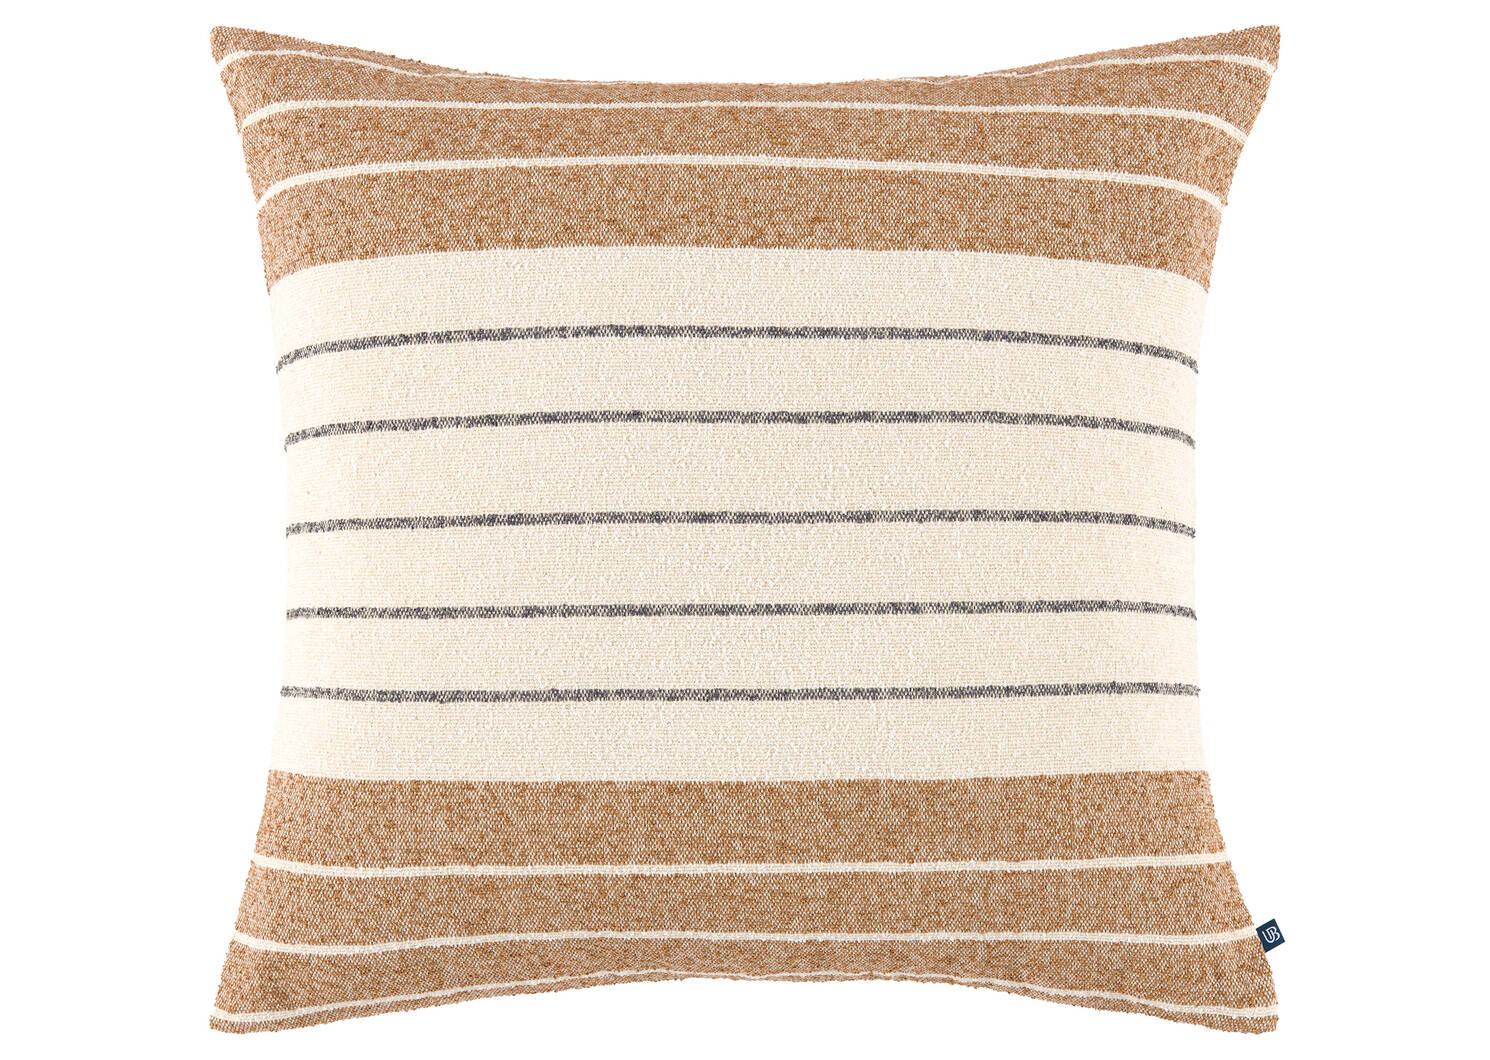 Curated Comfort Pillow Set